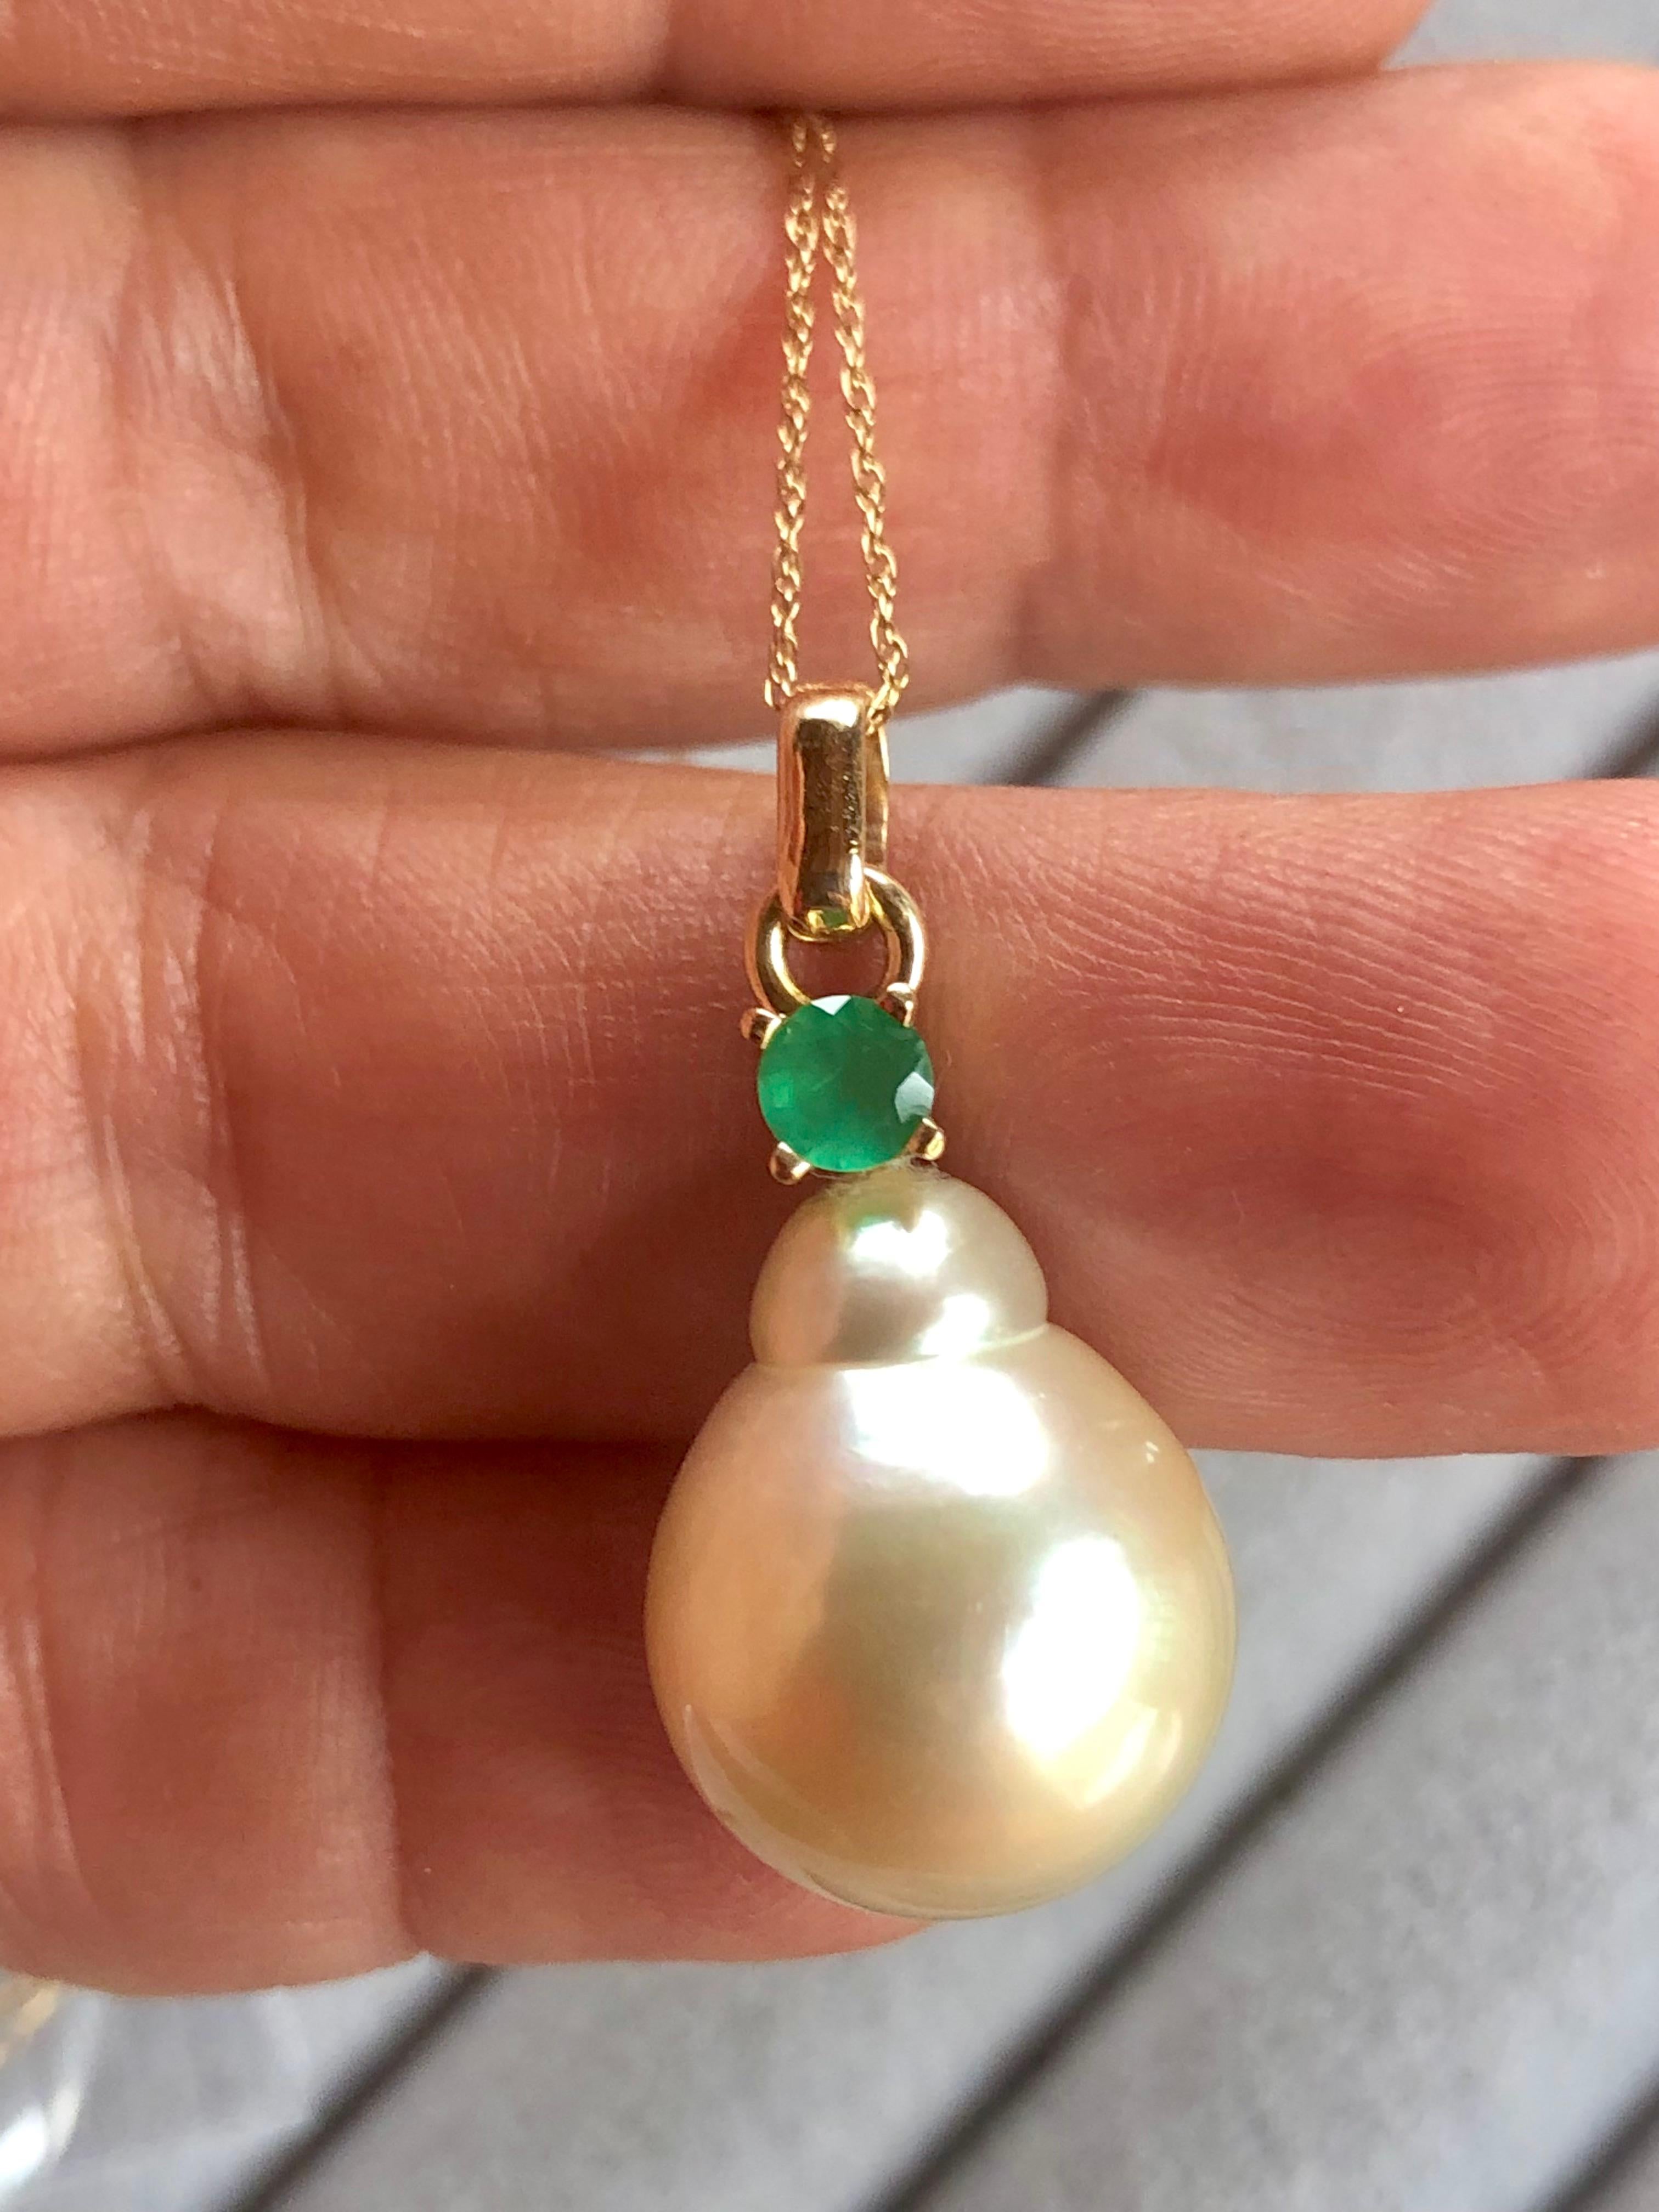 Primary Stones: 100% Cultivate Natural Baroque South Sea Pearl Pendant Necklace with  
Color/Surface: Cream golden, exhibits an excellent high luster, thick nacre & silky smooth surface
Pearl Measurements : 18.00x 14.00mm 
Pendant Length: 1